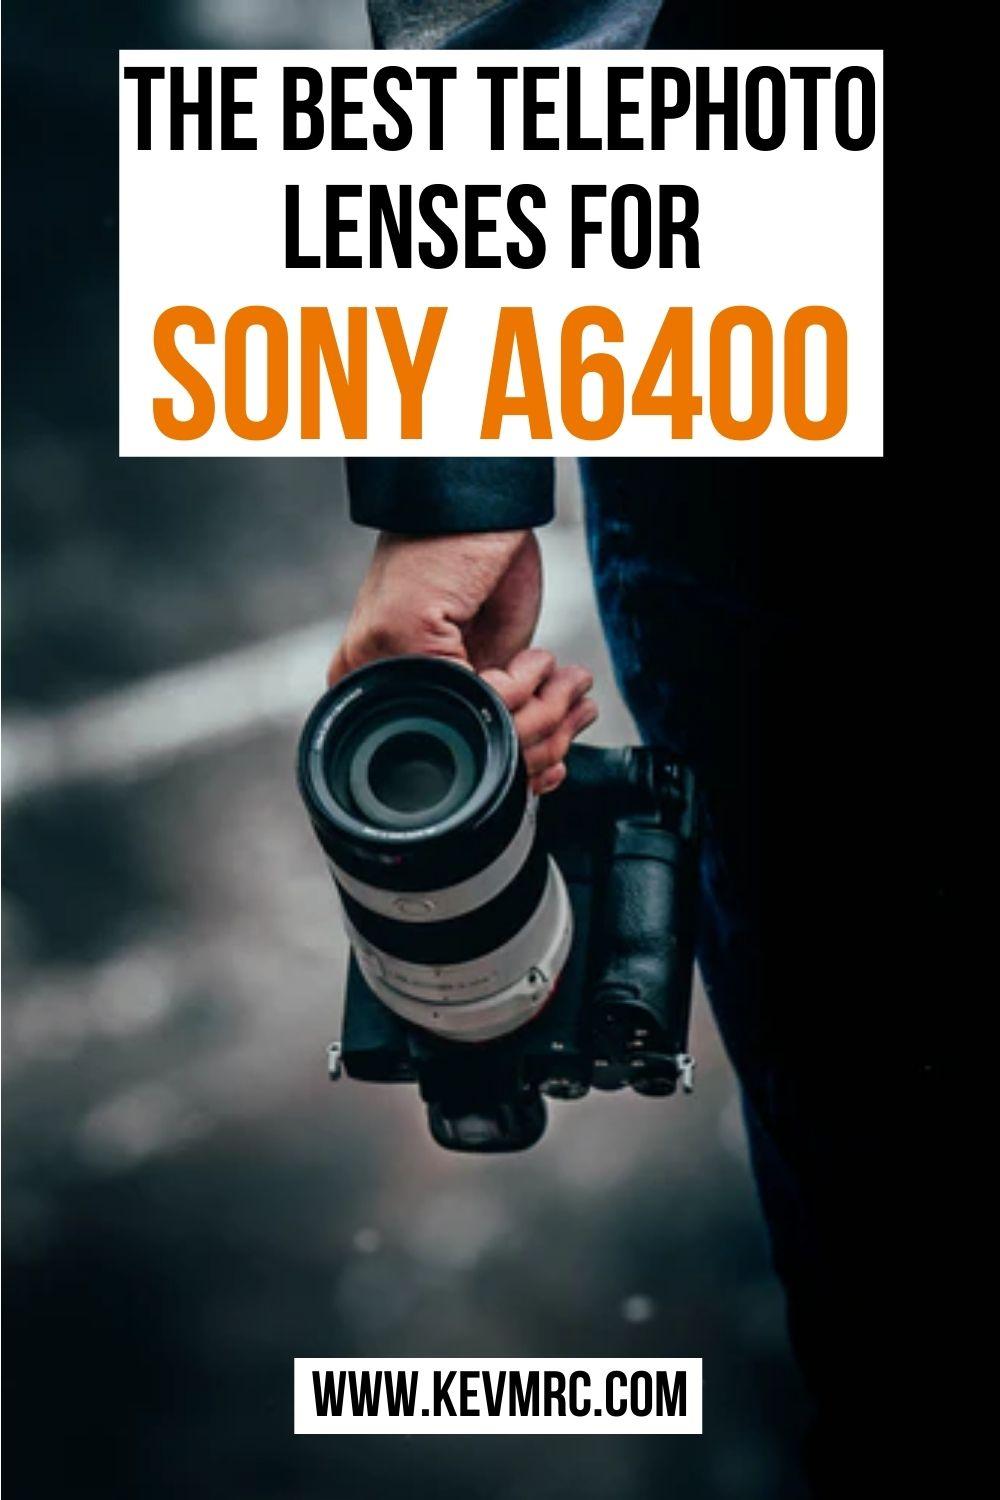 The Best Telephoto Lenses for Sony a6400. camera lens guide | sony camera | telephoto lens photography | telephoto zoom lens